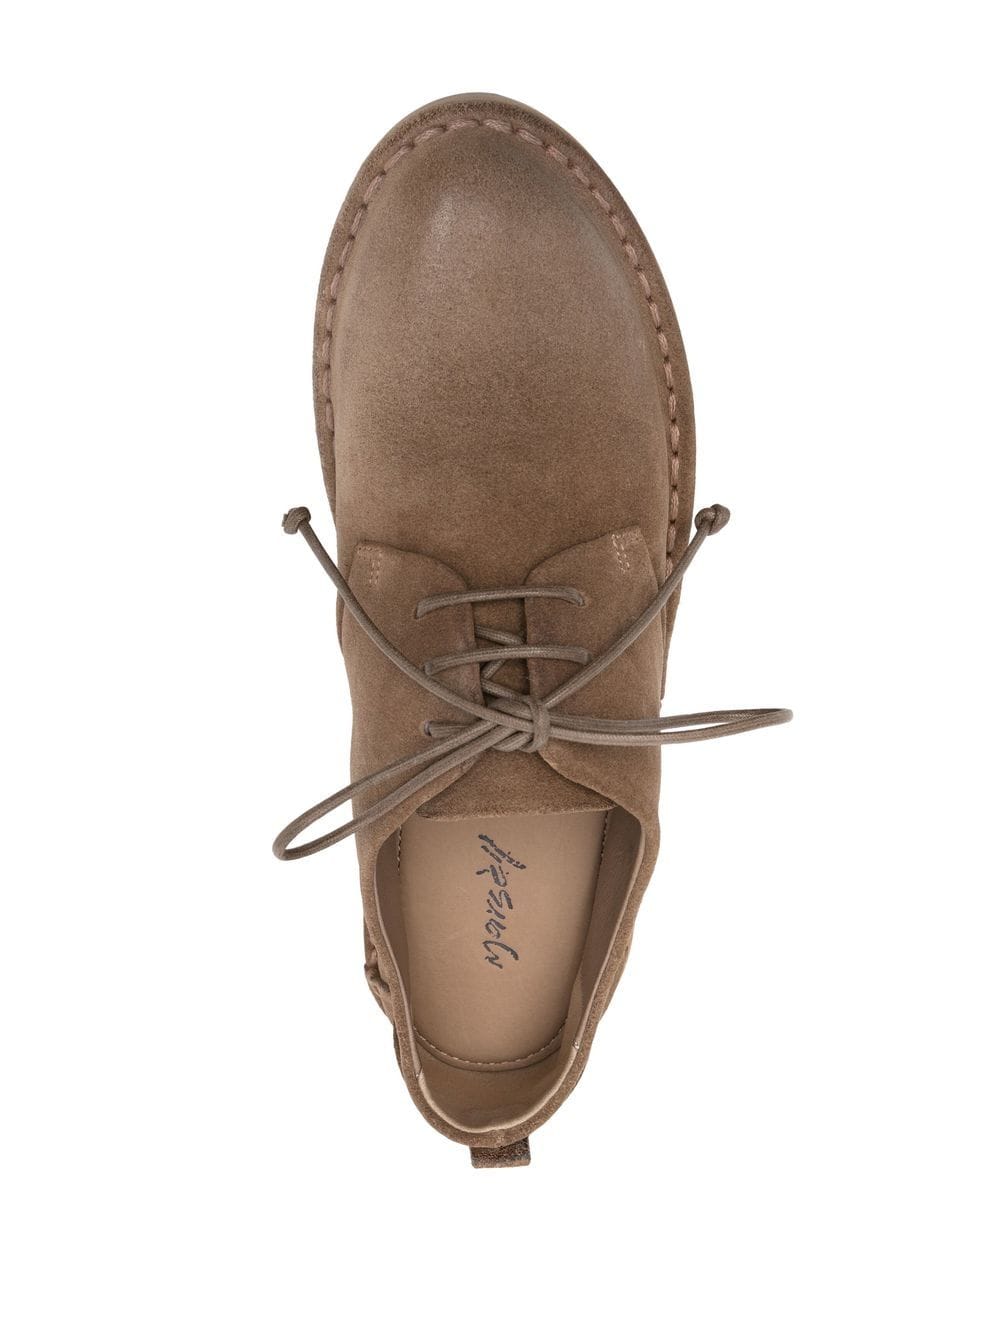 LACE-UP OXFORD SHOES